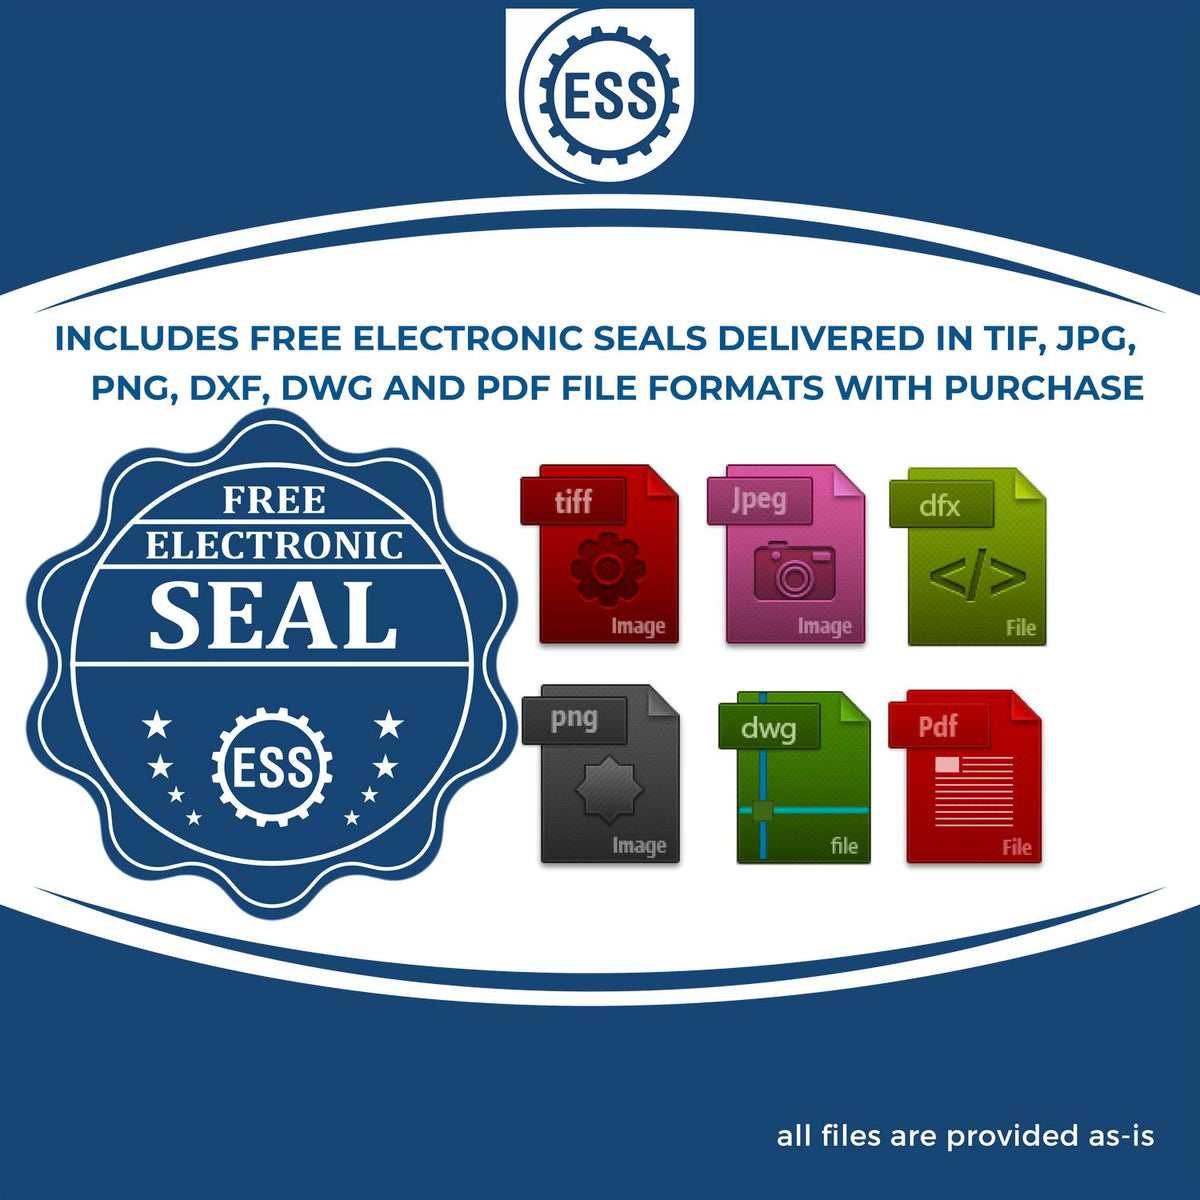 An infographic for the free electronic seal for the Self-Inking Florida Landscape Architect Stamp illustrating the different file type icons such as DXF, DWG, TIF, JPG and PNG.